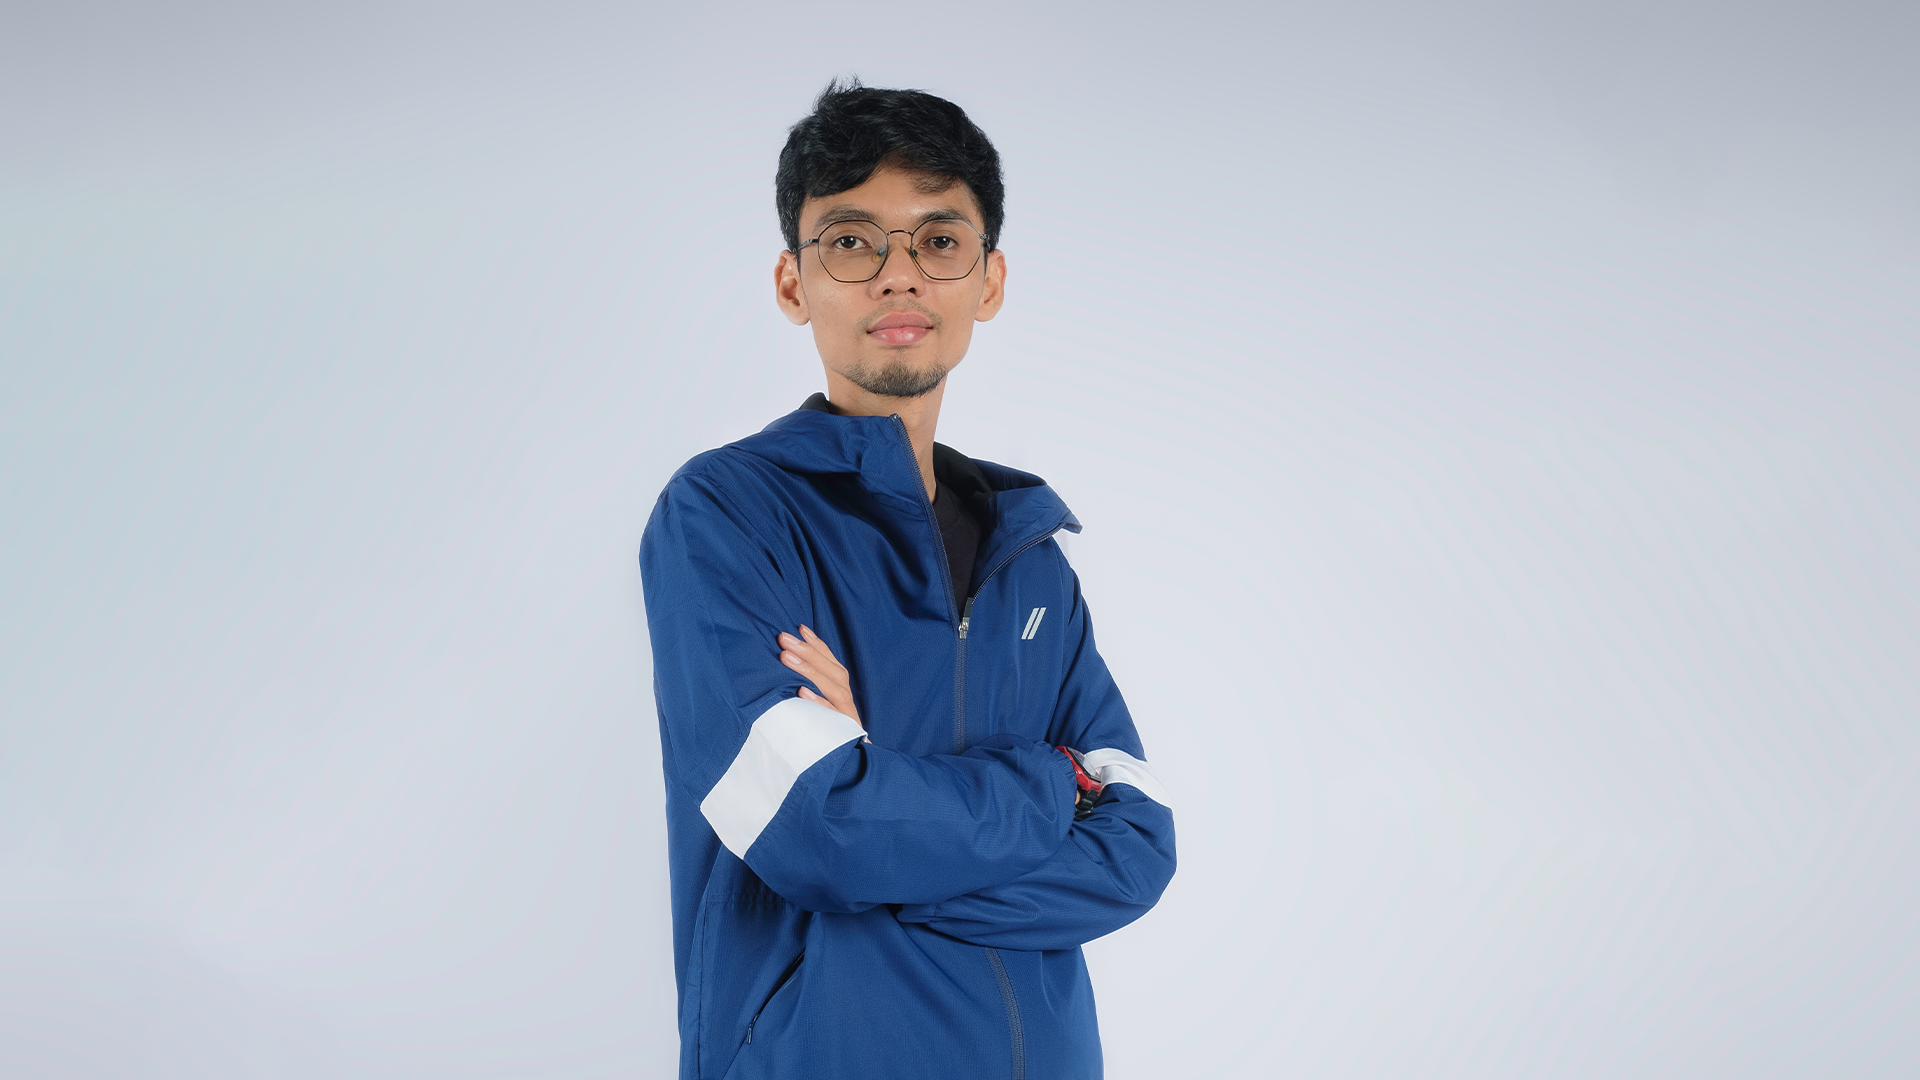 Chief Commercial Officer VCGamers, Ibnu Anggara. <b>Source: VCGamers</b>